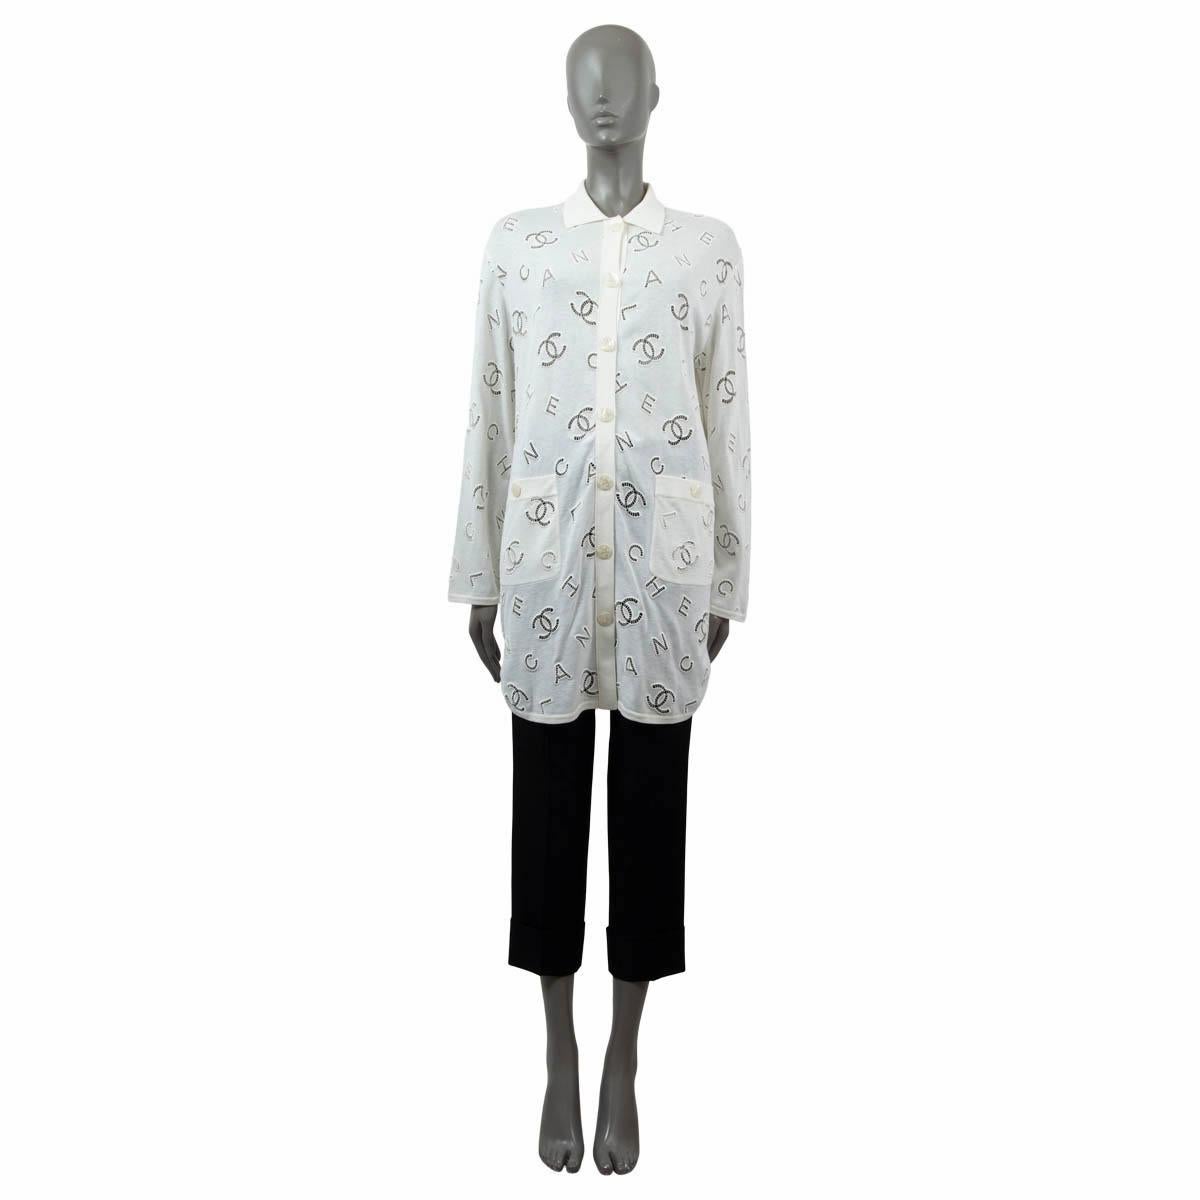 100% authentic Chanel collared oversized long cardigan in ivory cotton (70%) and cashmere (30%). Features logo broderie anglaise embroidery and two patch pockets on the front. Closes with CC mother-of-pearl buttons on the front. Has been worn and is